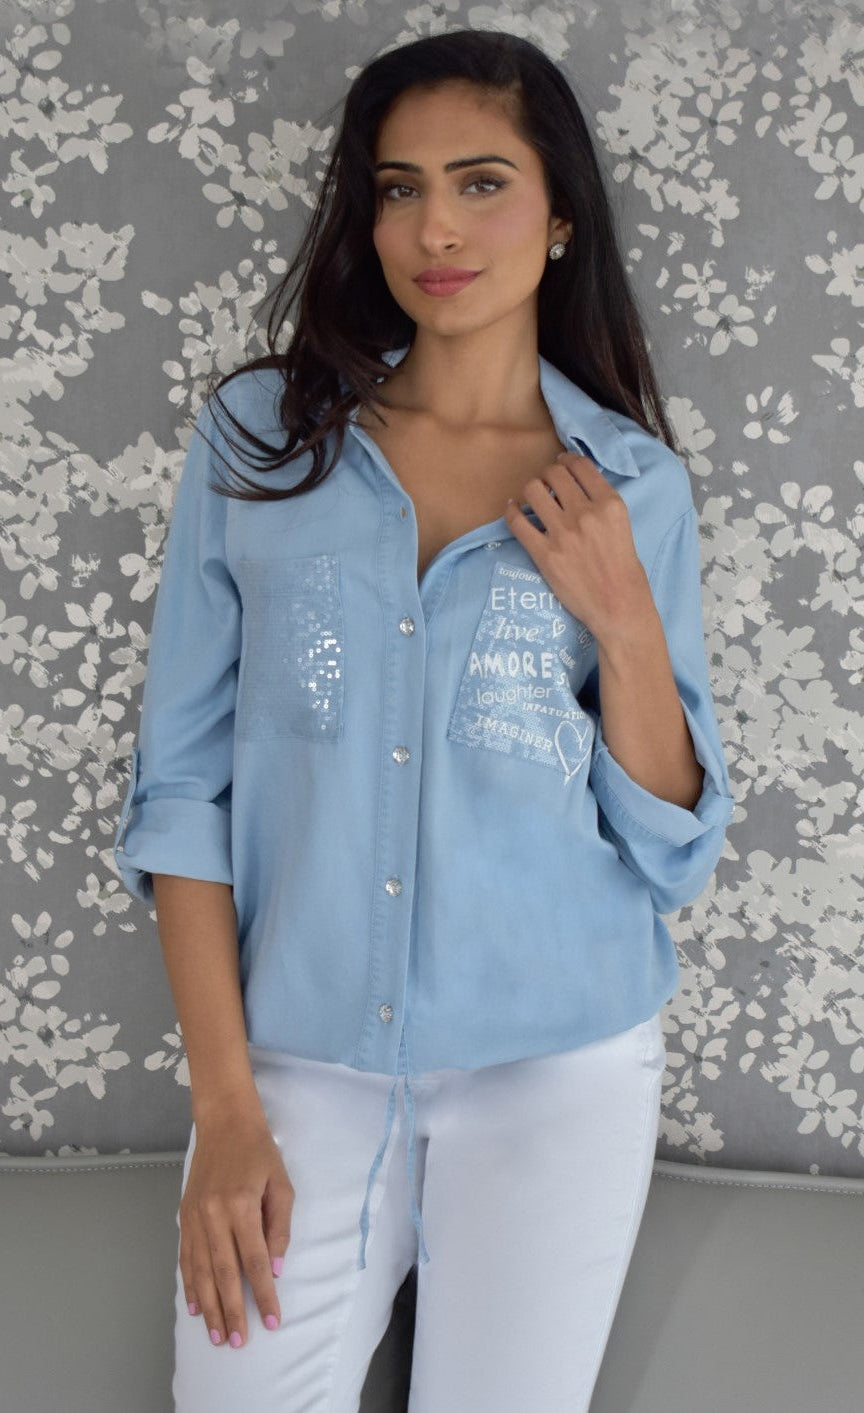 Front top half view of a woman wearing white pants and the frank lyman blue amore shirt. This shirt has a button down front, a drawstring hem with a tie in the middle, and two front patch pockets. The right pocket has sequins on it while the left pocket has words about love written on it.